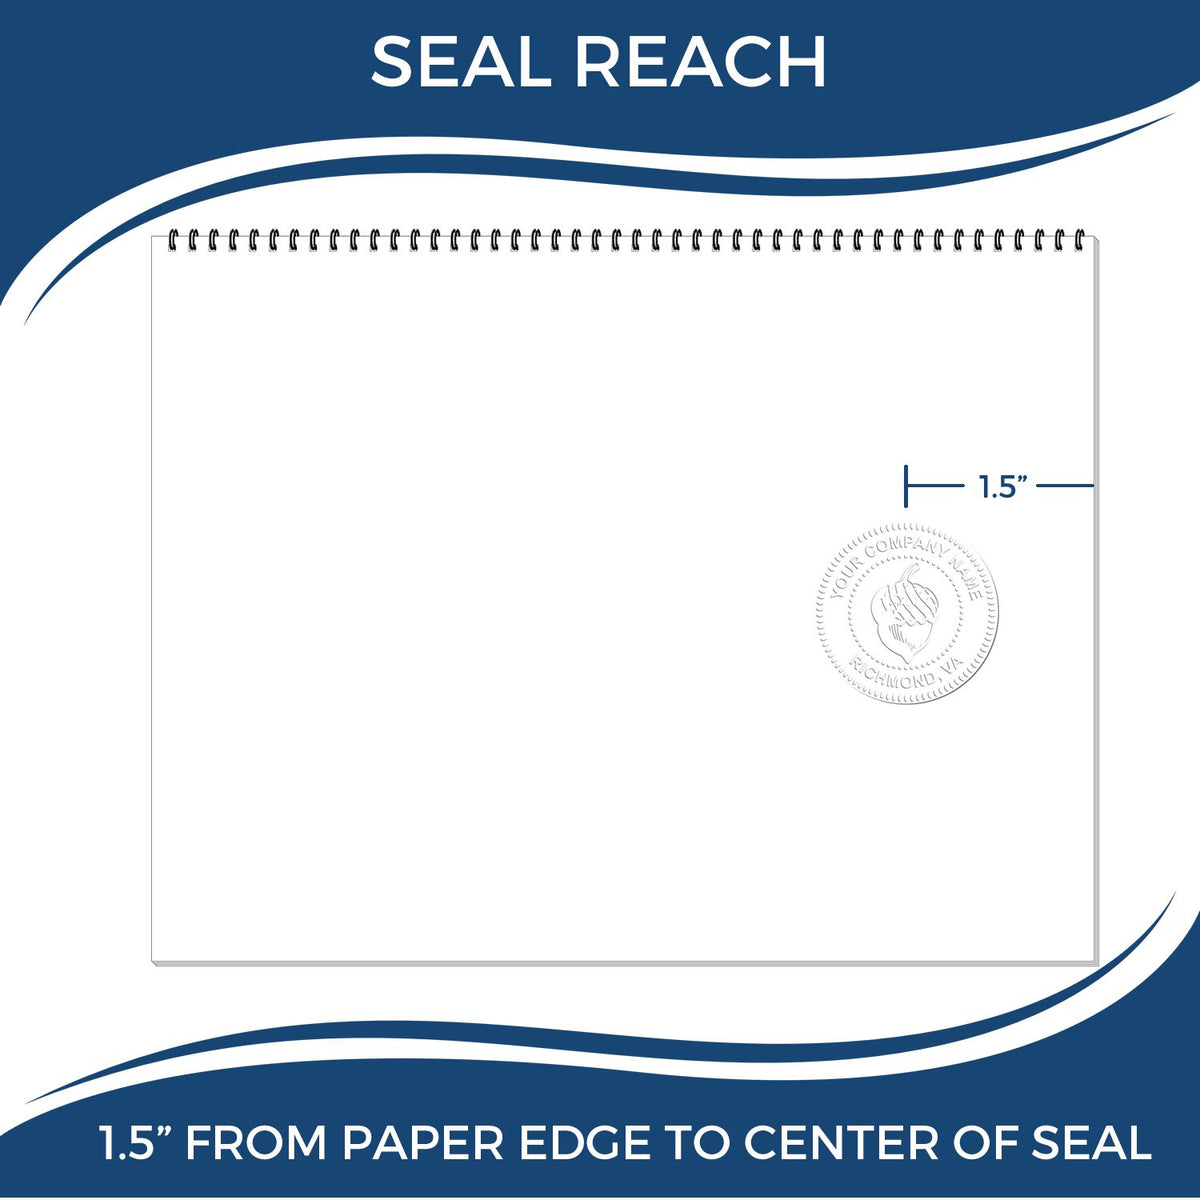 An infographic showing the seal reach which is represented by a ruler and a miniature seal image of the Handheld Florida Professional Engineer Embosser